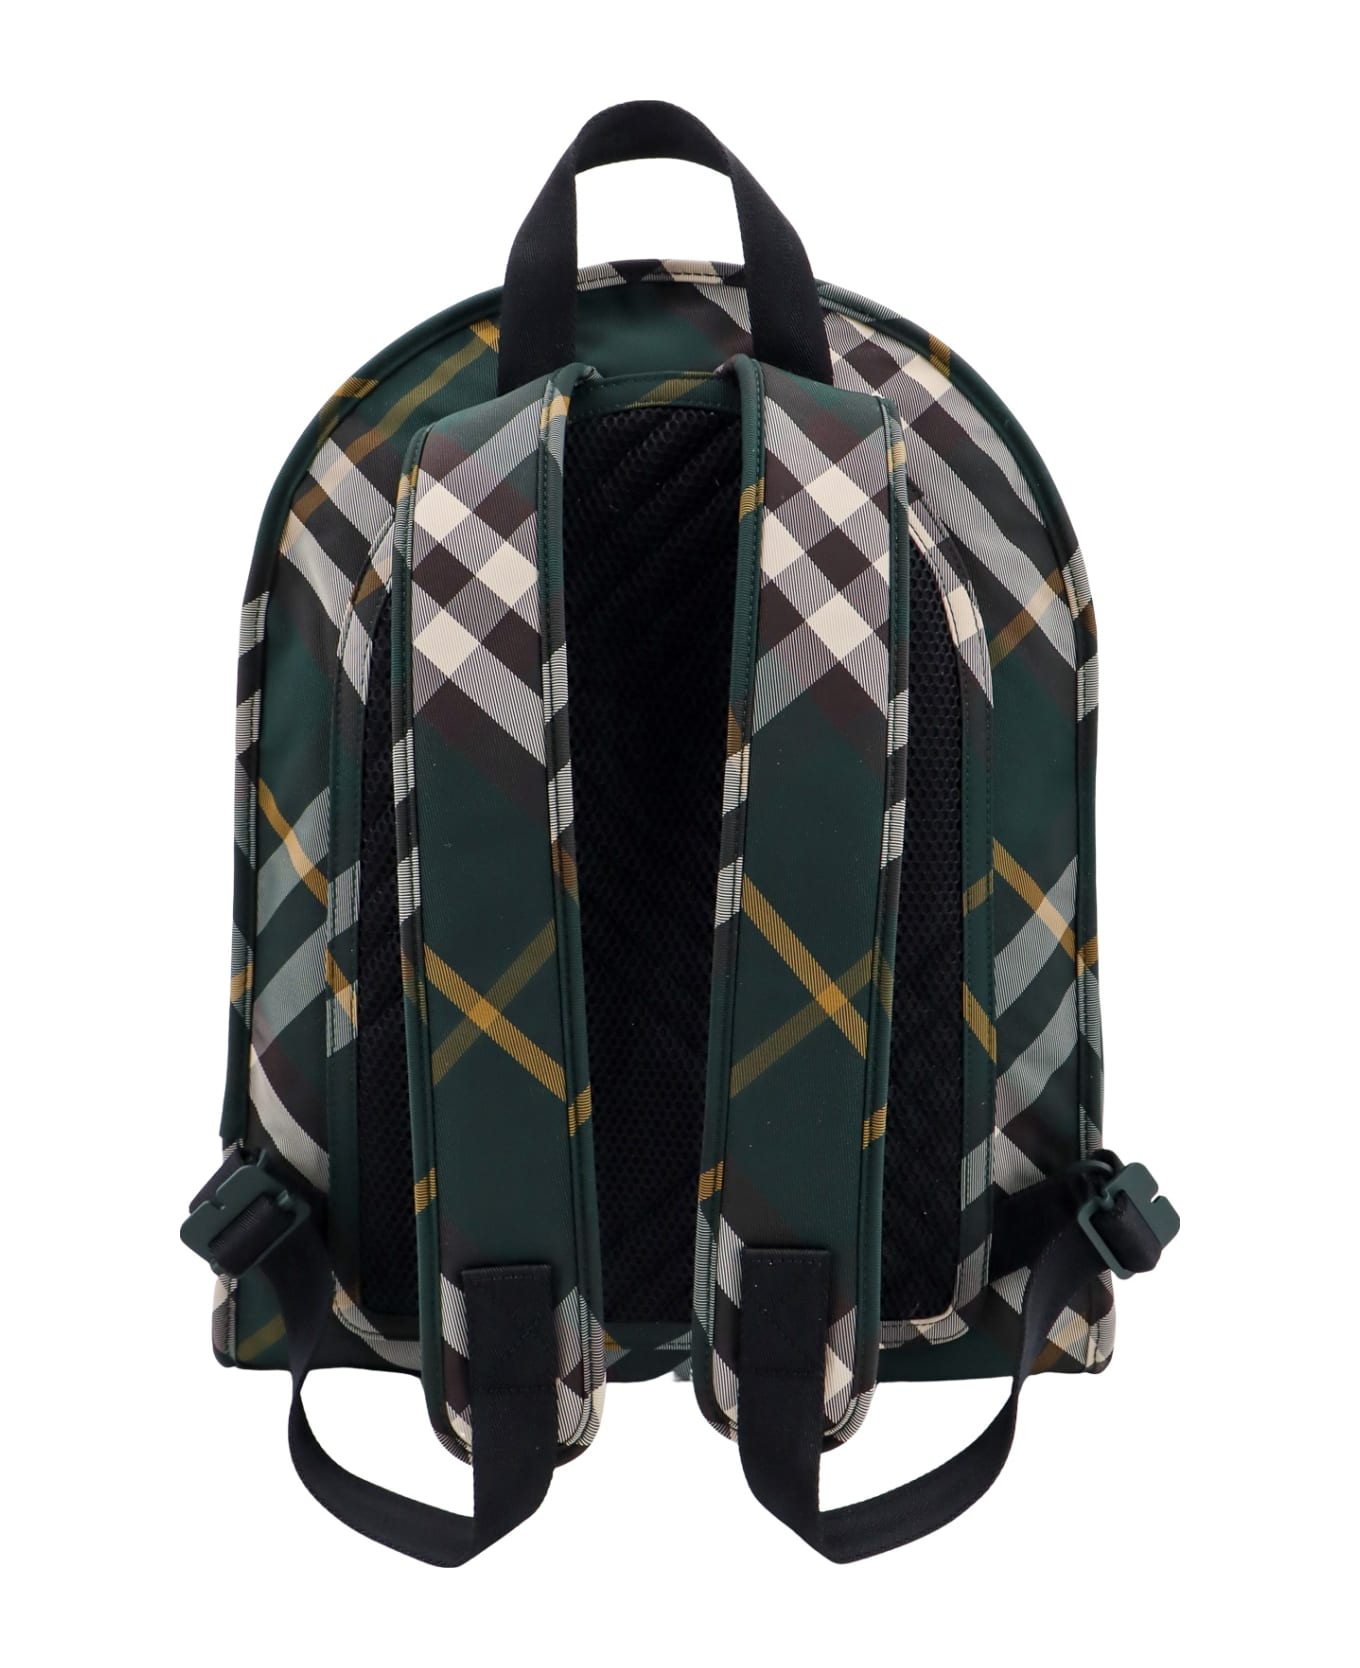 Burberry Backpack - Ivy